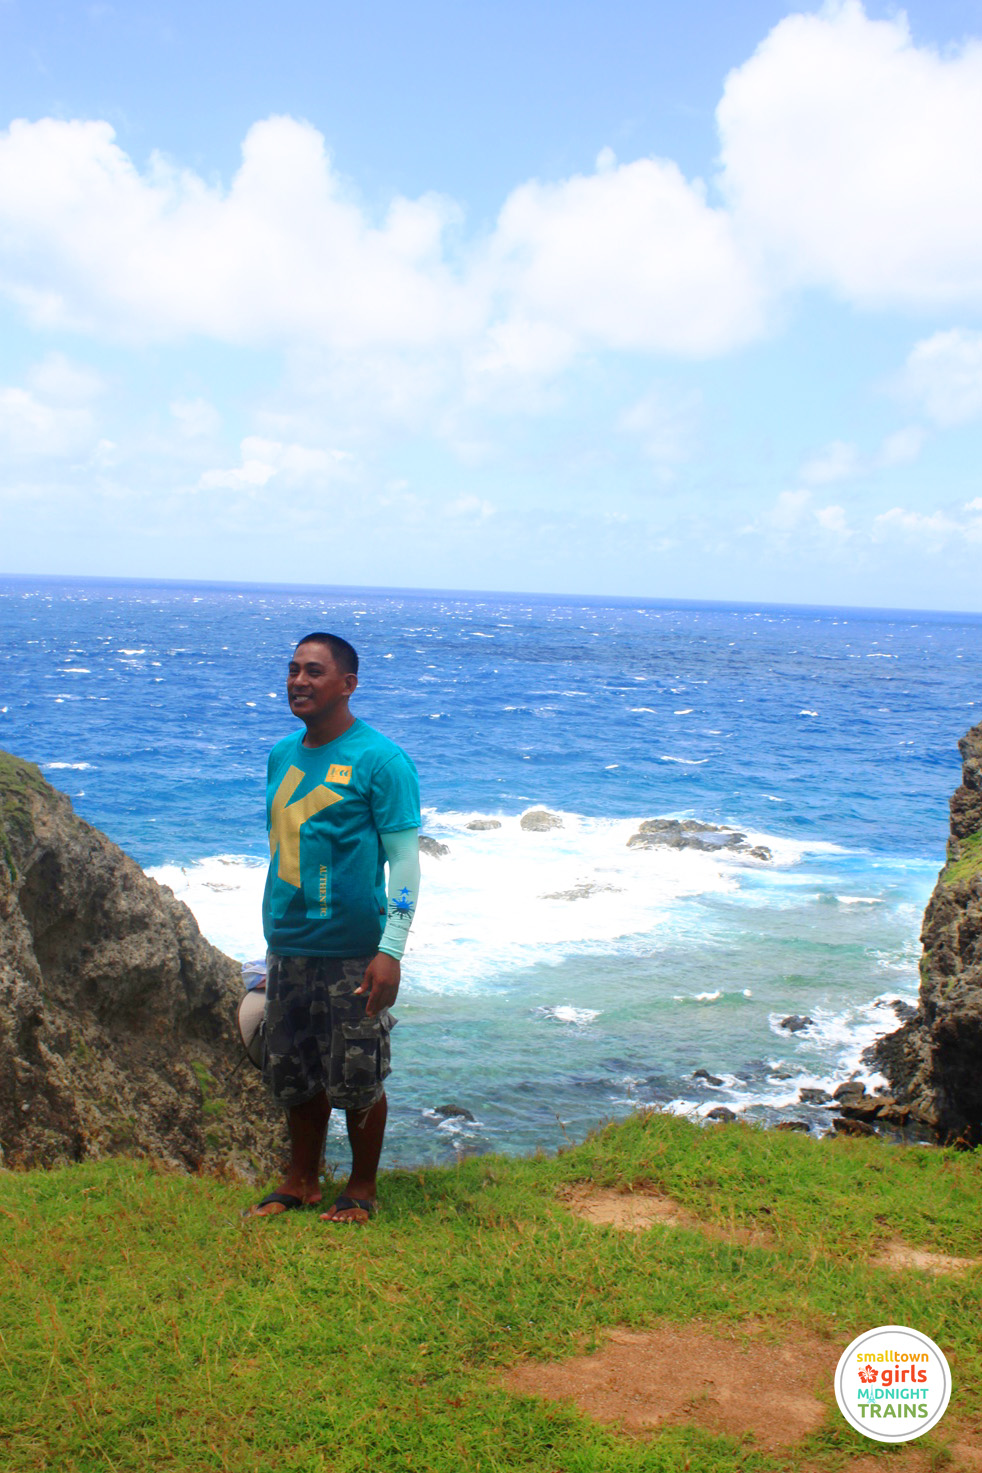 Romy Daroca, our tour guide in Batanes